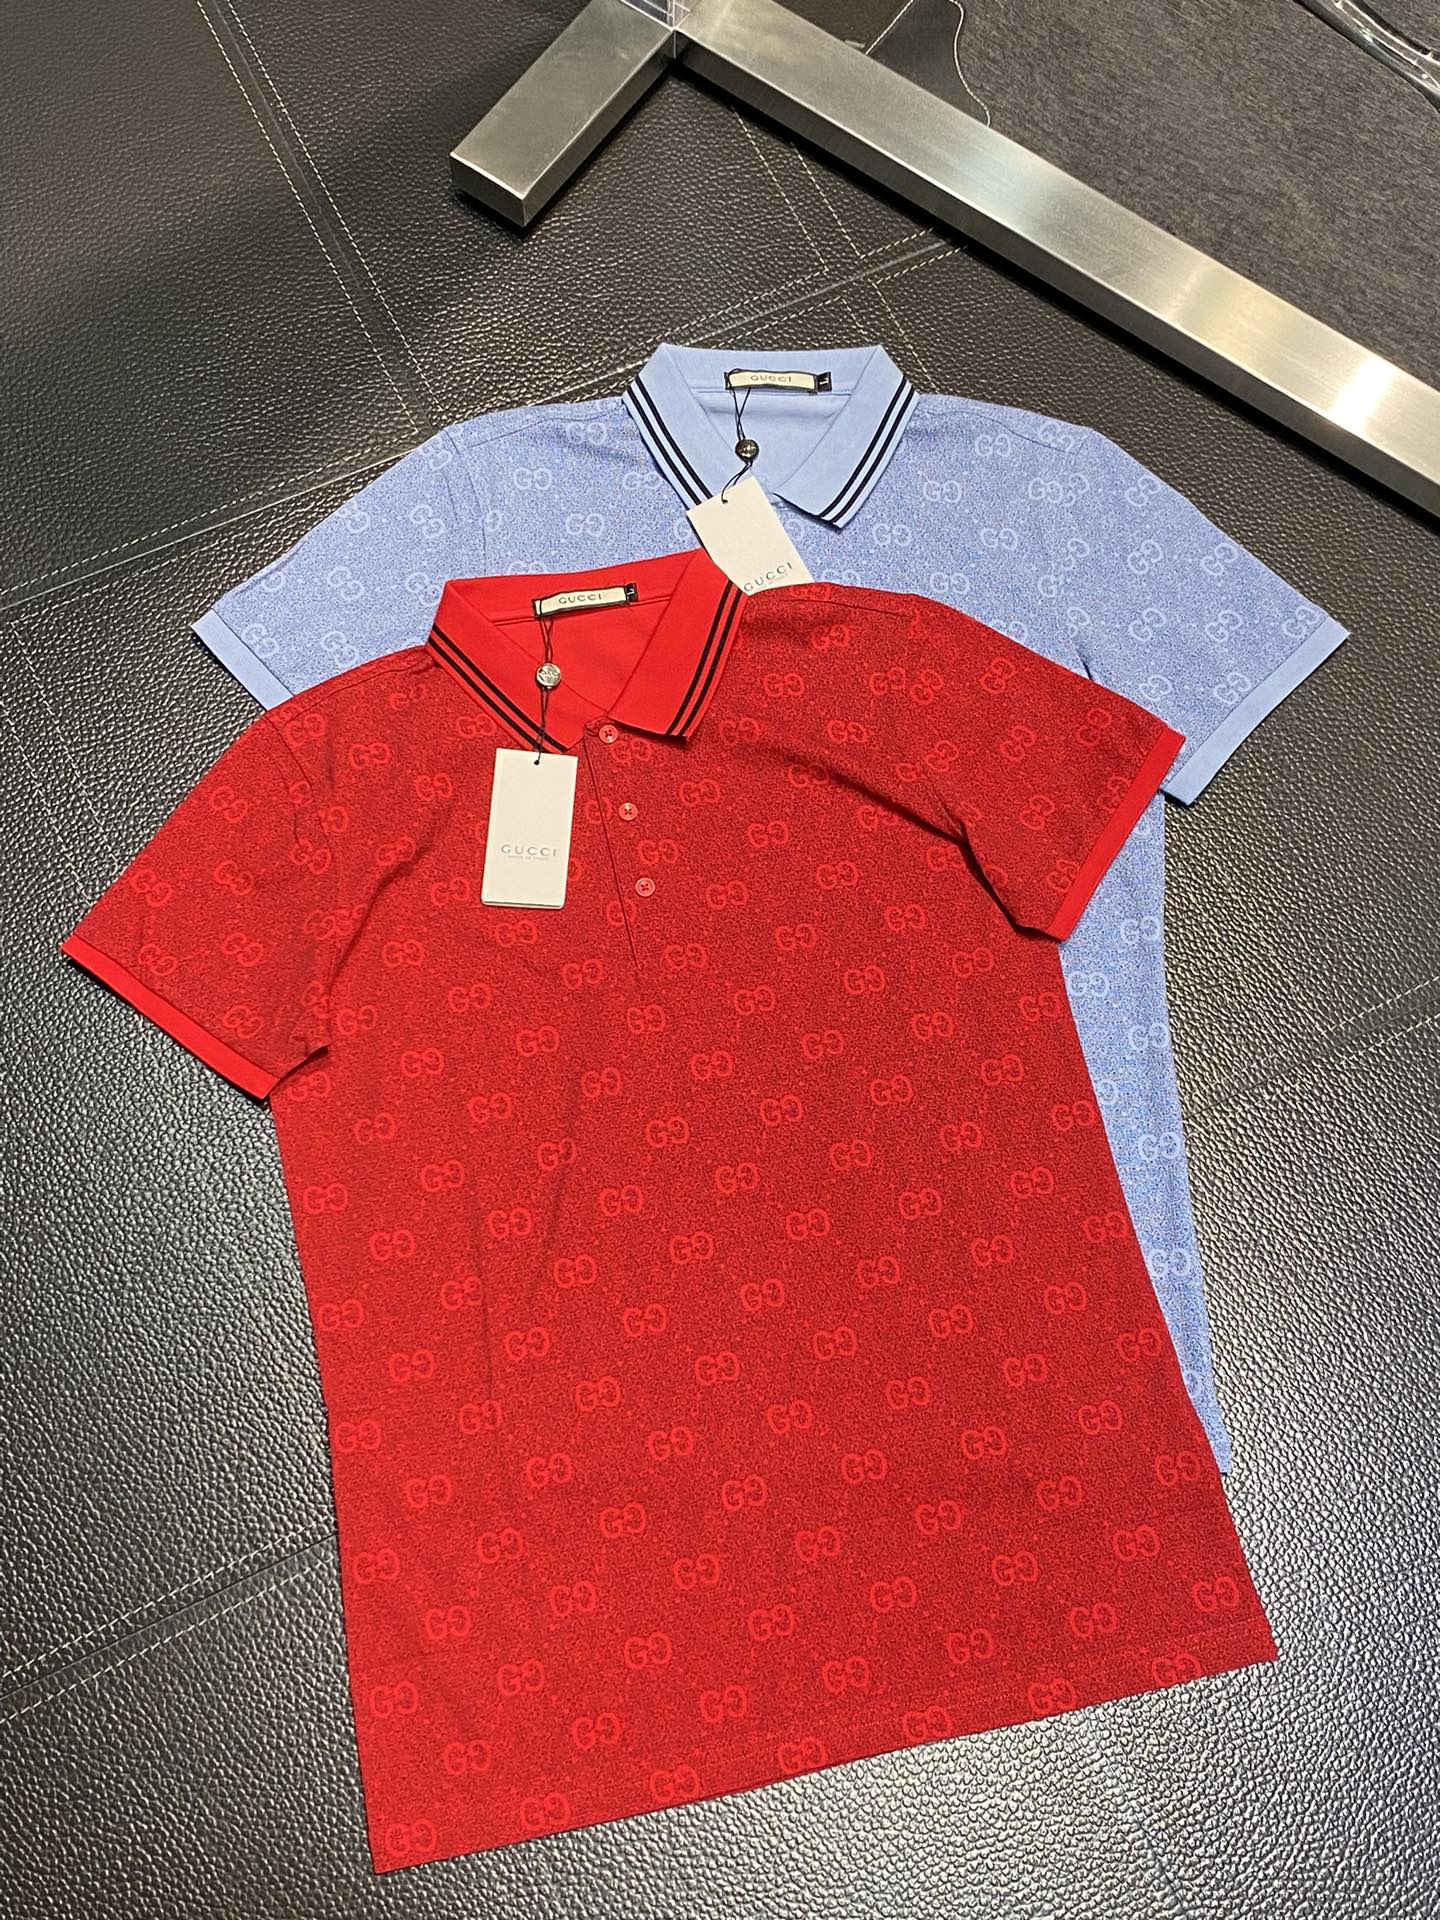 Gucci AAAAA
 Clothing Polo T-Shirt for sale online
 Men Fashion Short Sleeve